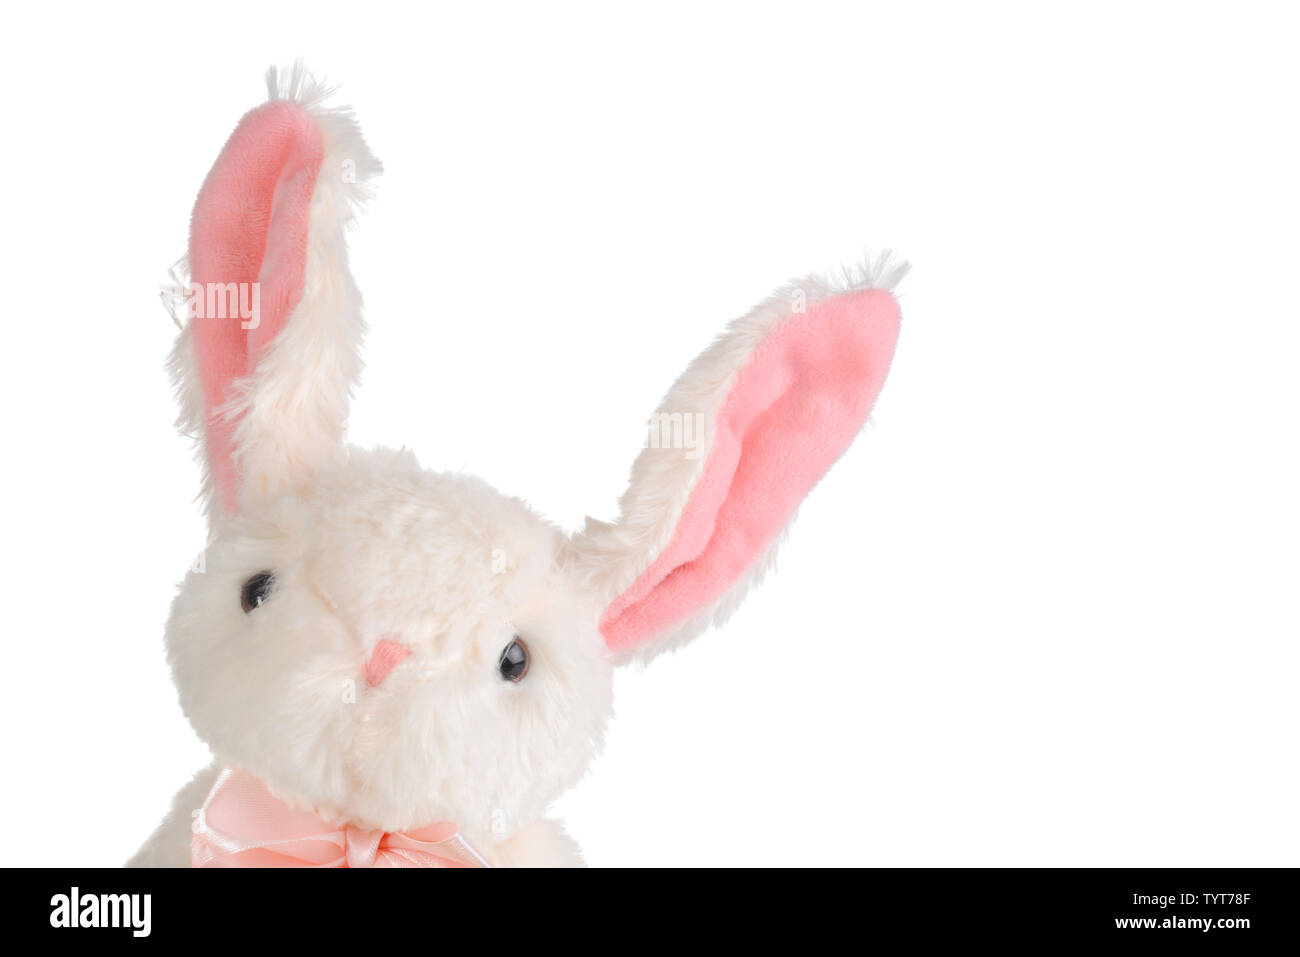 White Soft Furry Bow and Ears Bunny Rabbit Pouch